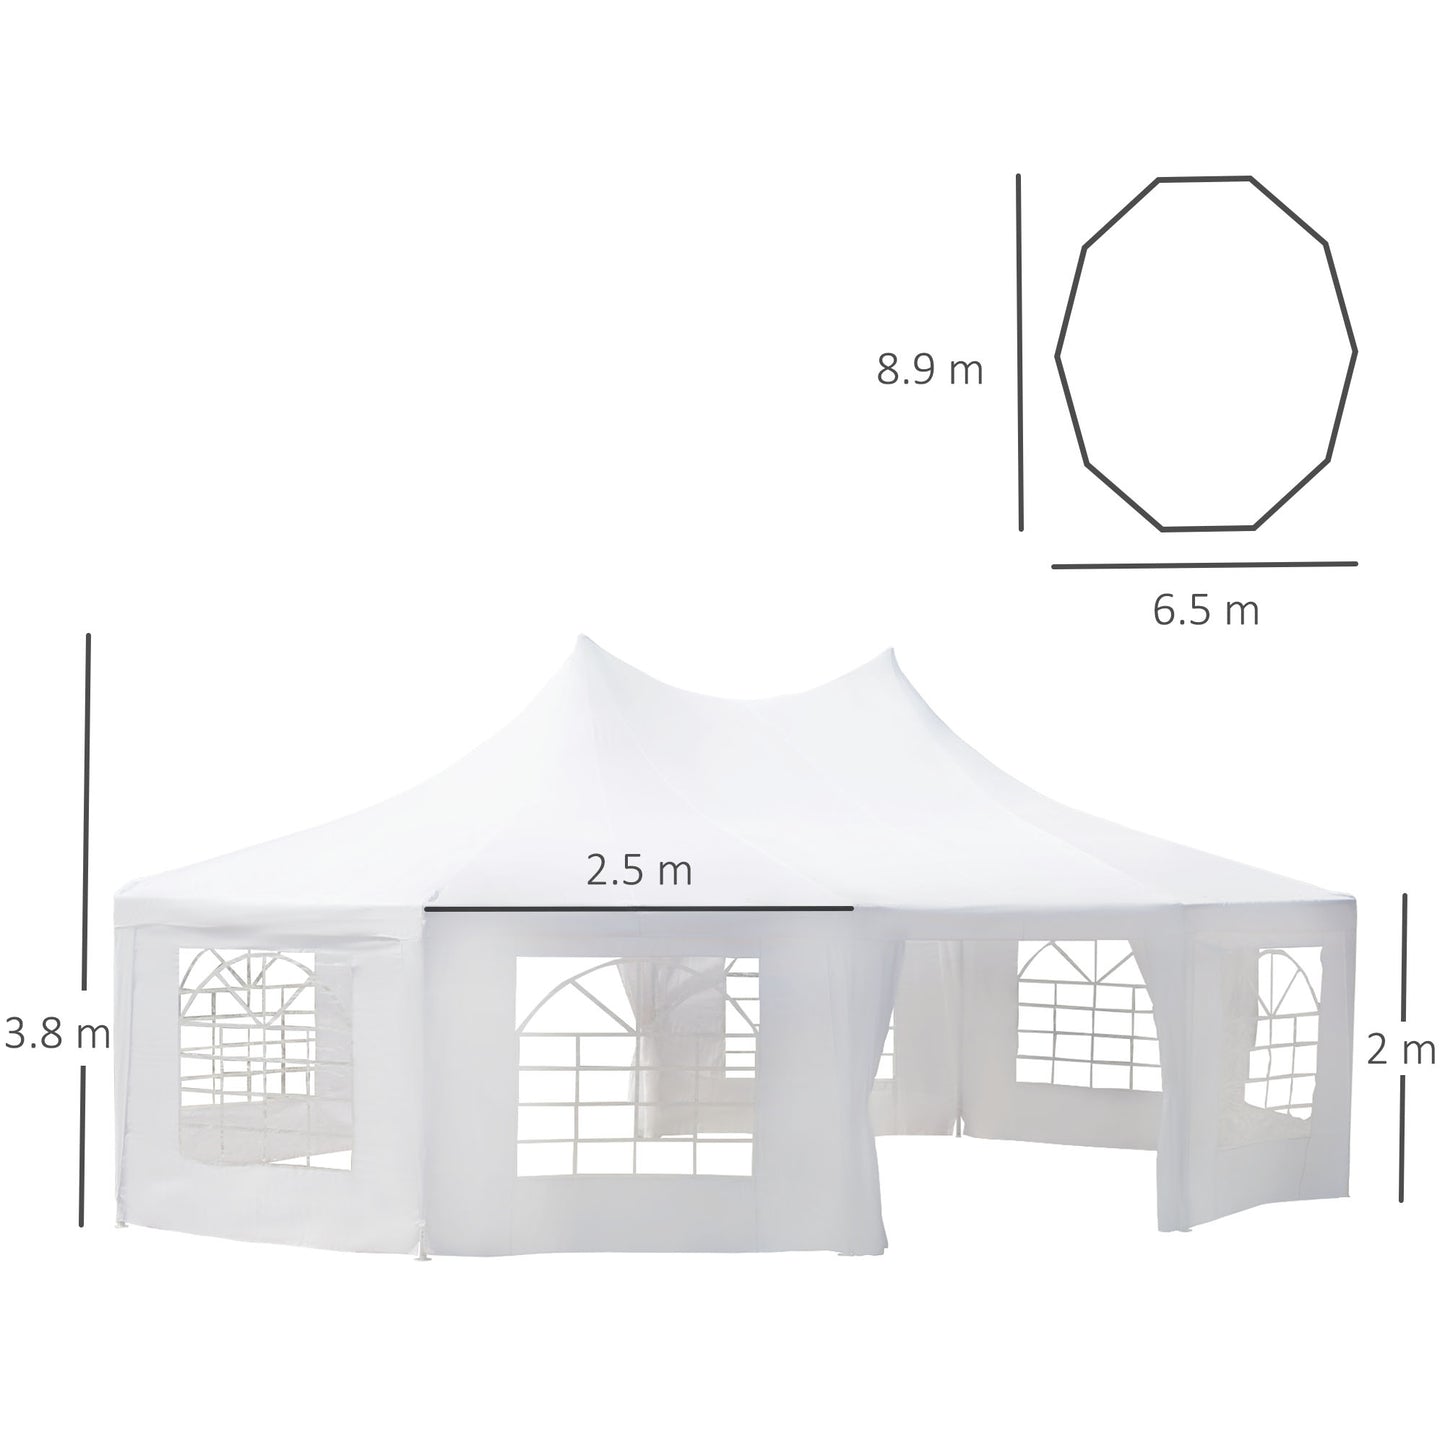 Outsunny Garden Party Tent 8.9x6.5 m Waterproof Marquee Canopy White 10 Sides Decagonal Gazebo Wedding Canopy Outdoor Heavy Duty Metal Frame